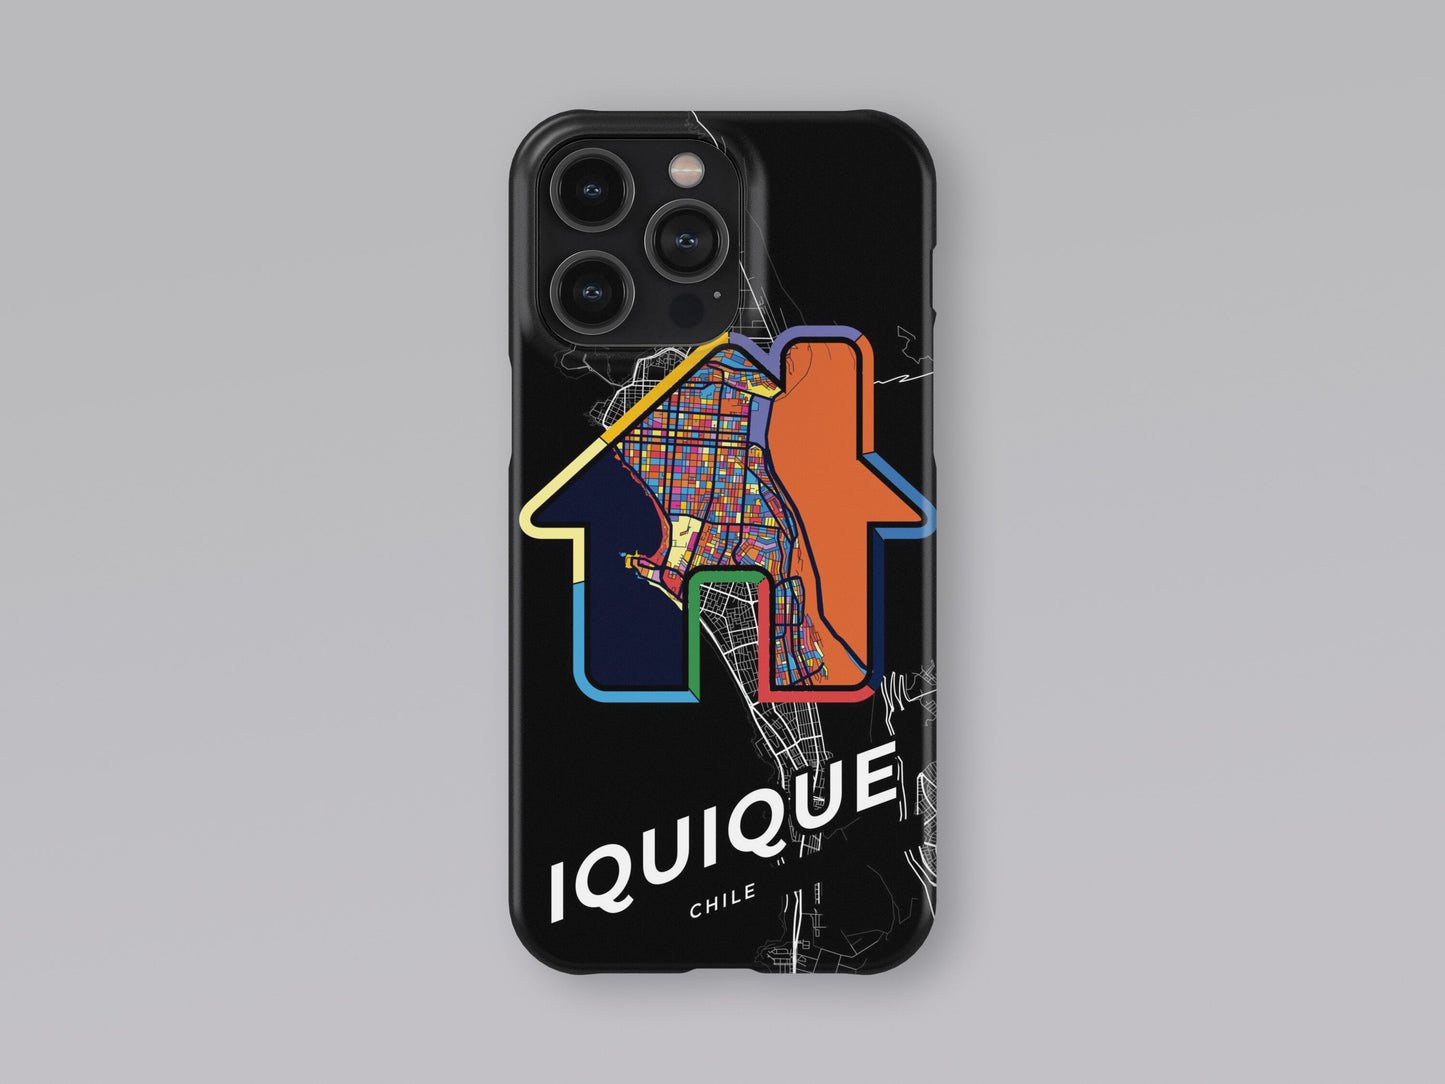 Iquique Chile slim phone case with colorful icon. Birthday, wedding or housewarming gift. Couple match cases. 3